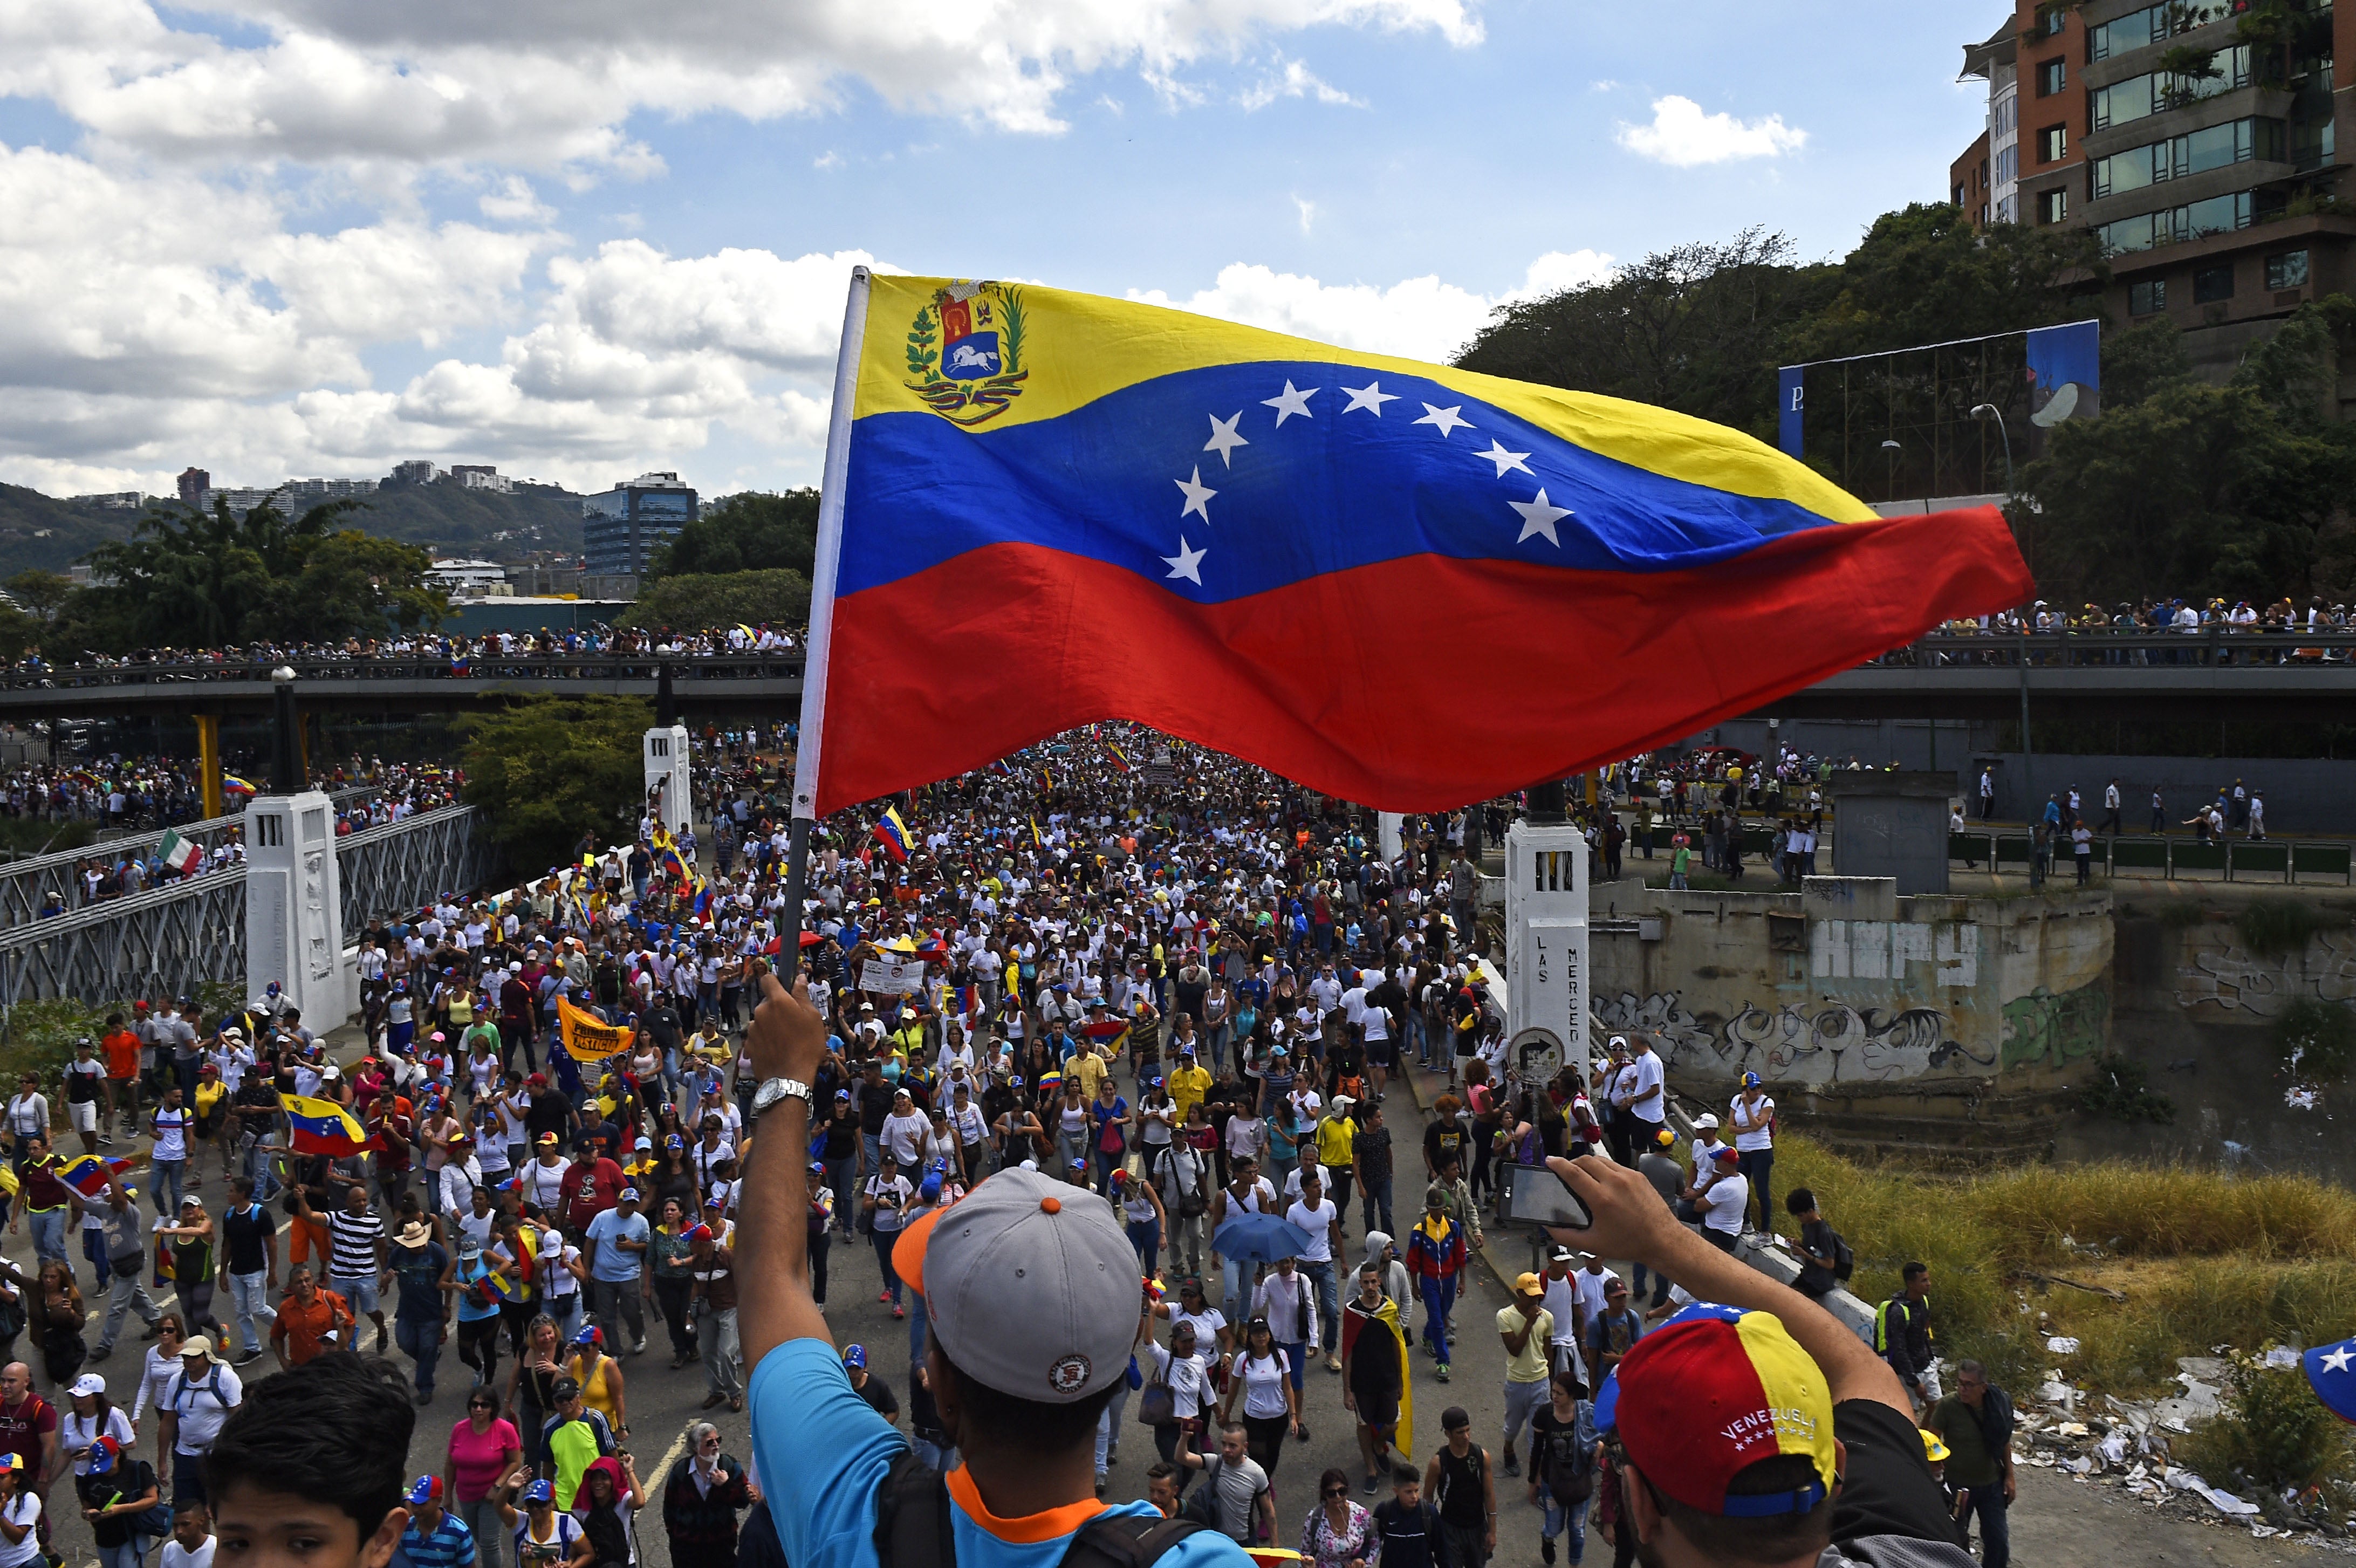 Venezuela’s opposition parties have returned to the ballot box, having abstained for the past four years